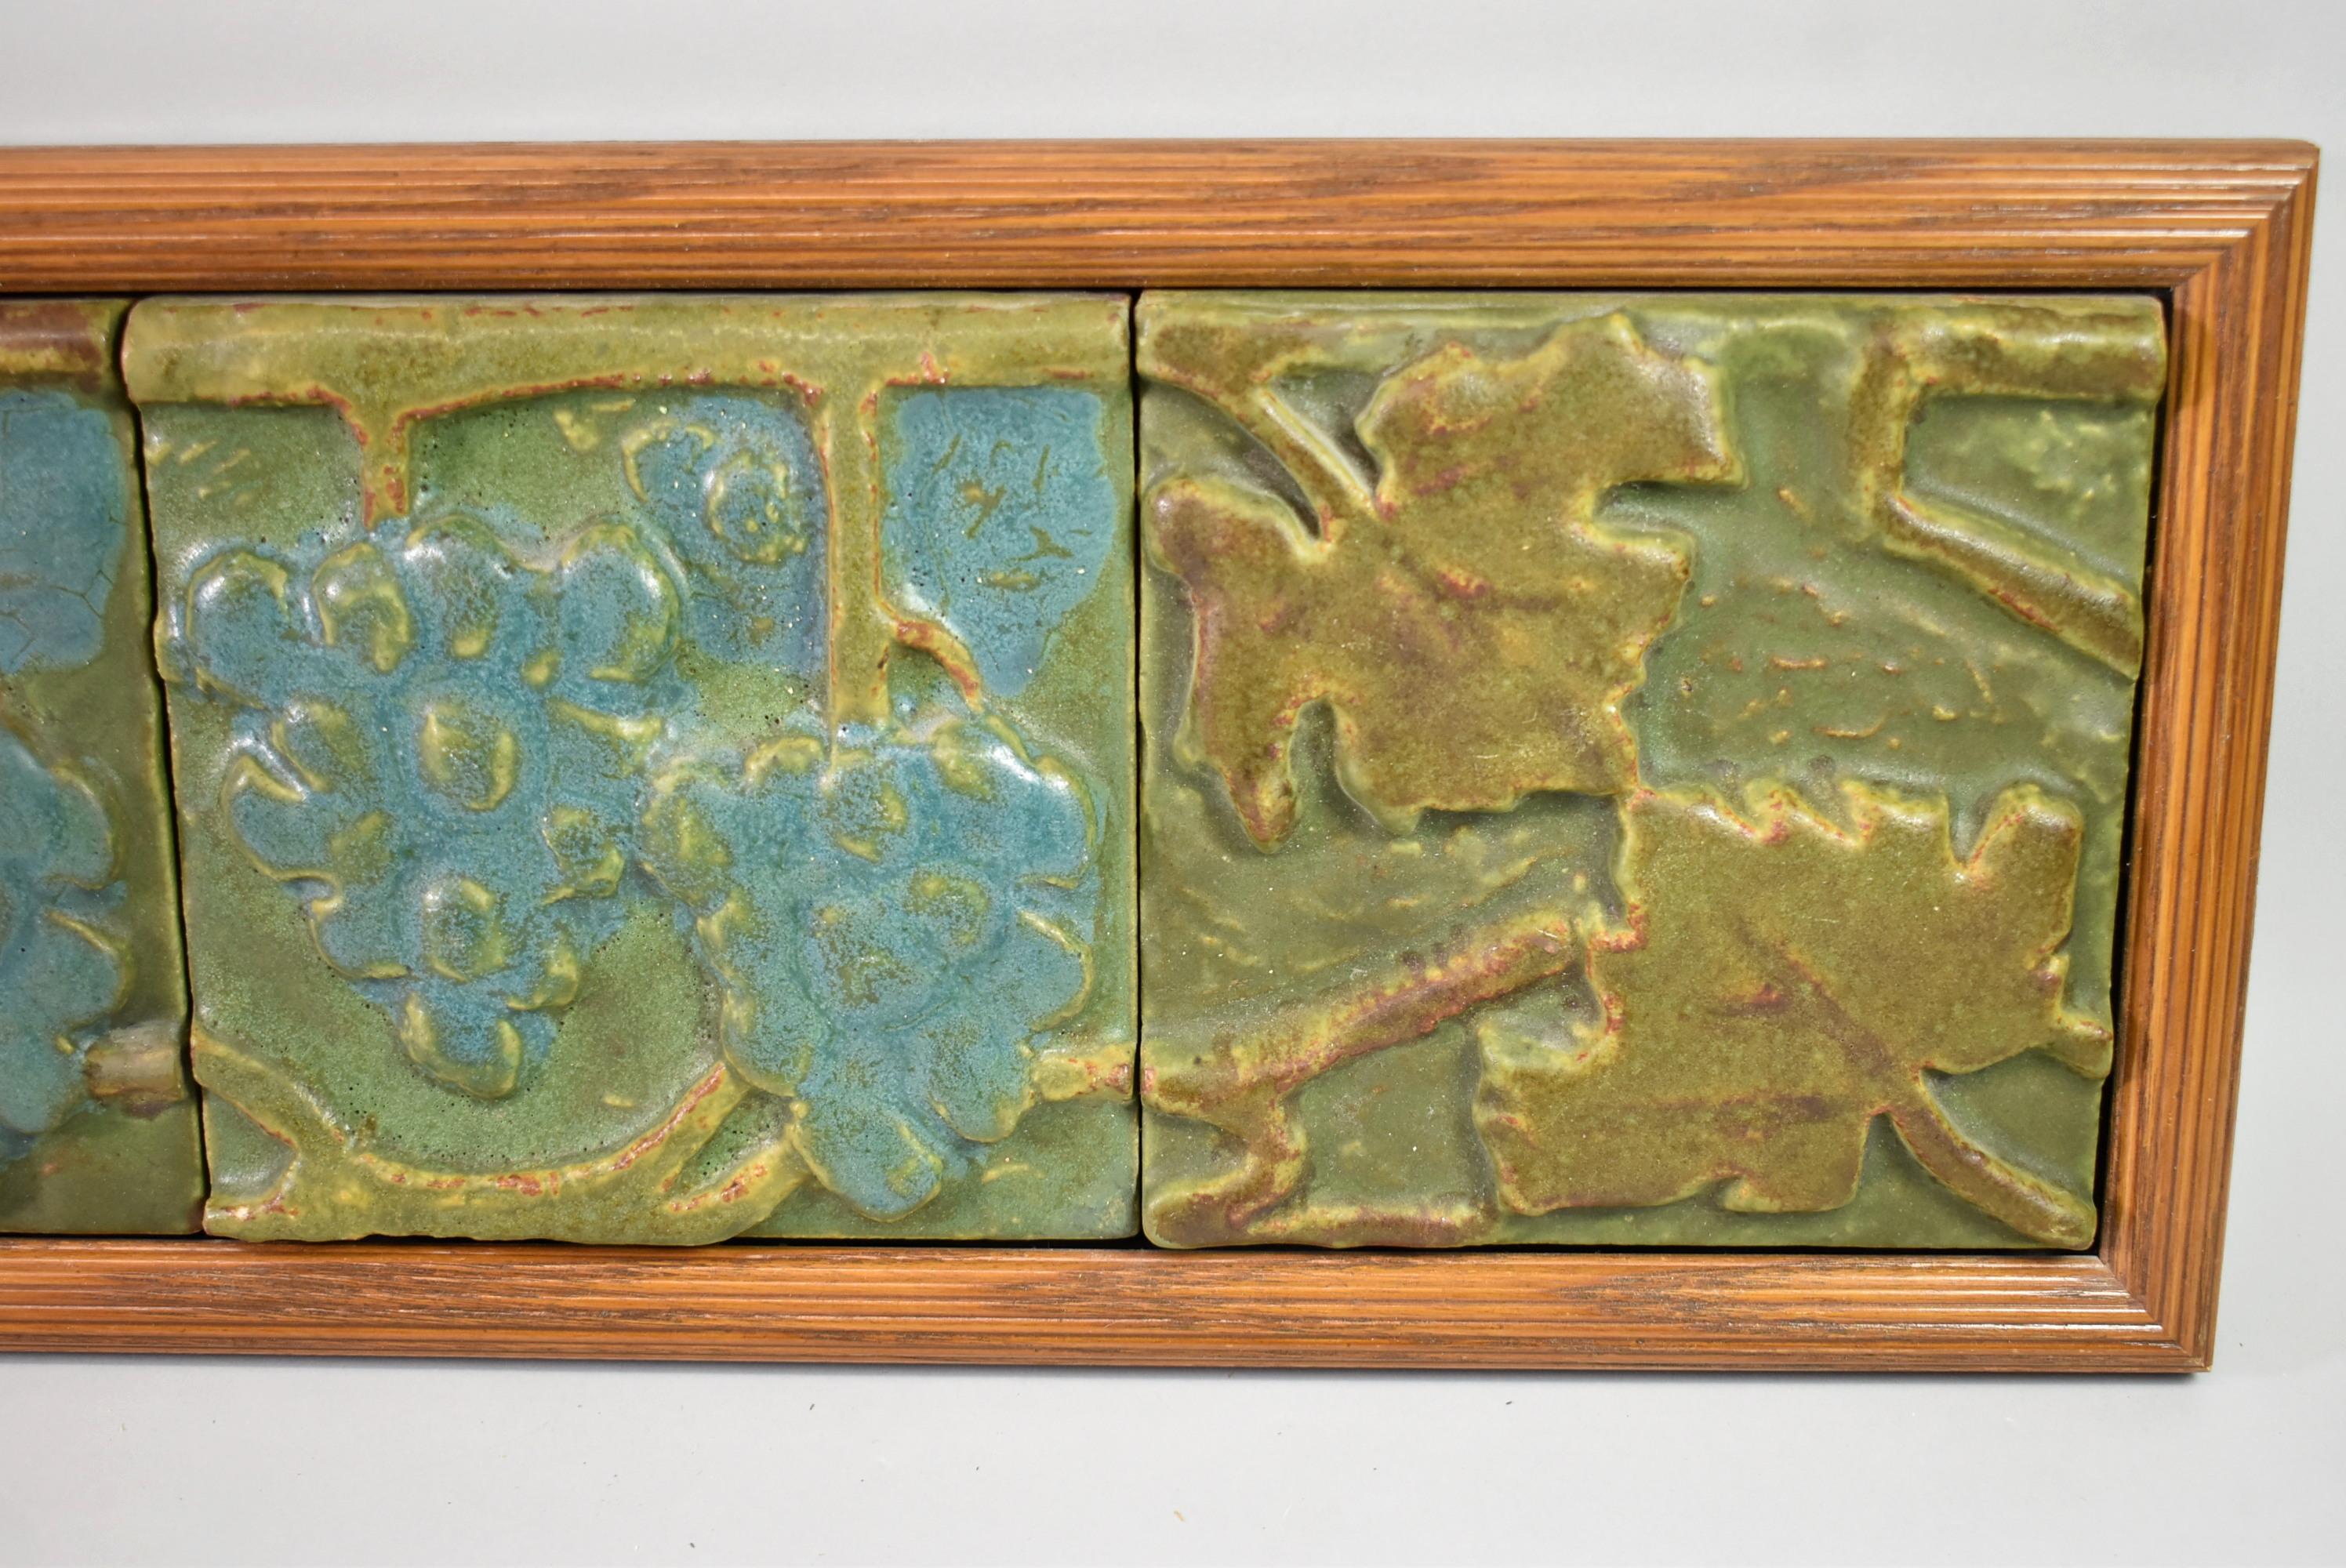 These four Rookwood Arts & Crafts Grape Tiles are framed with a grape and leaf motif. Each tile is 6